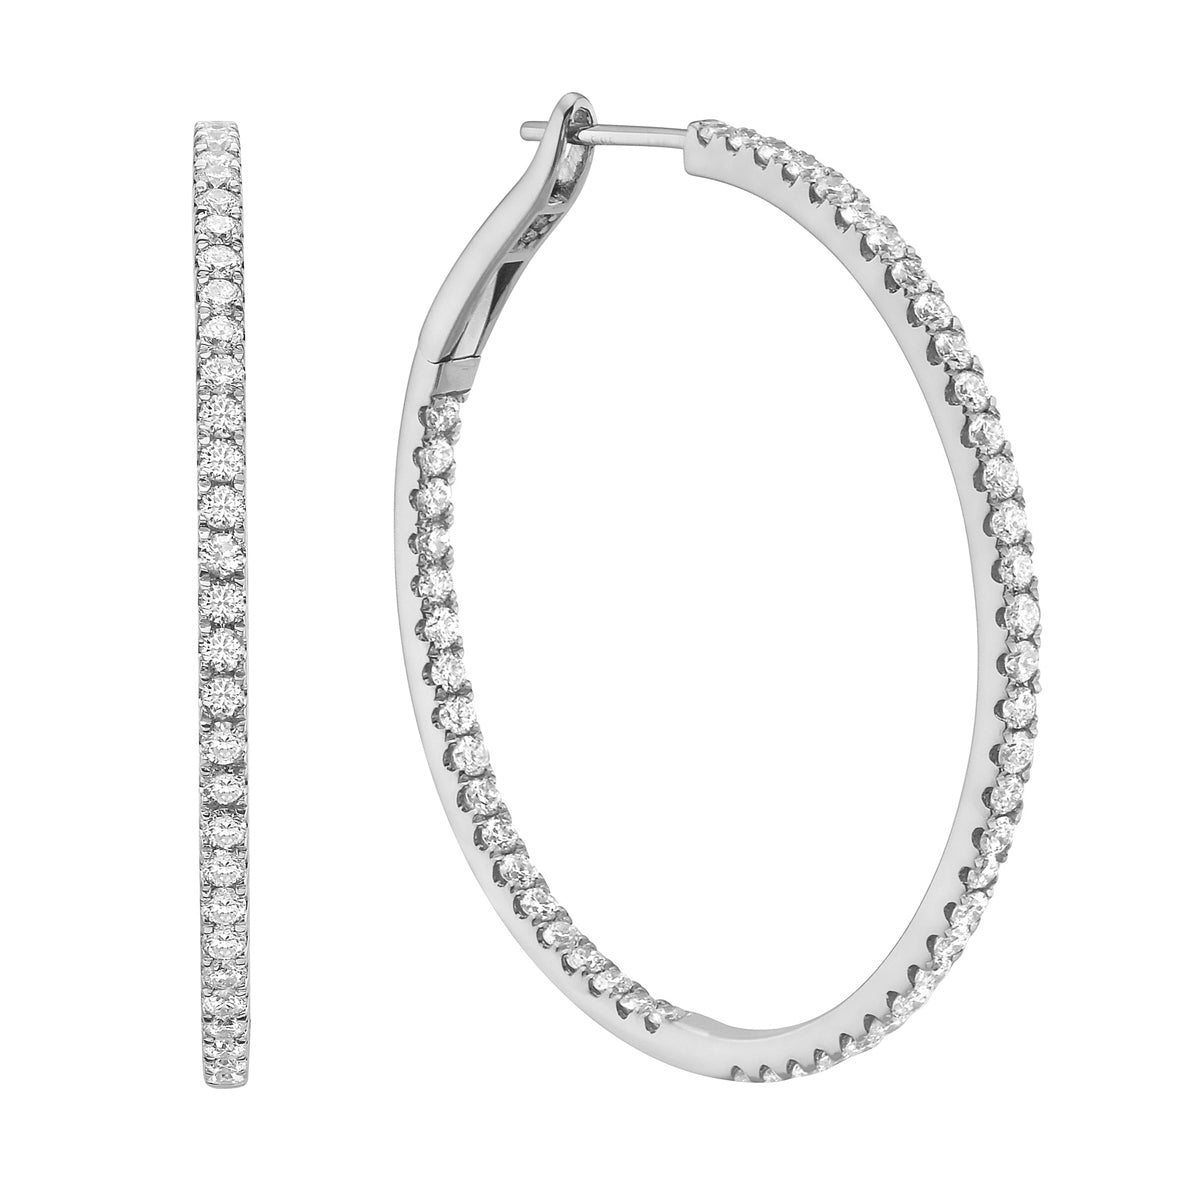 1.5in White Gold Inside and Out Diamond Hoop Earrings